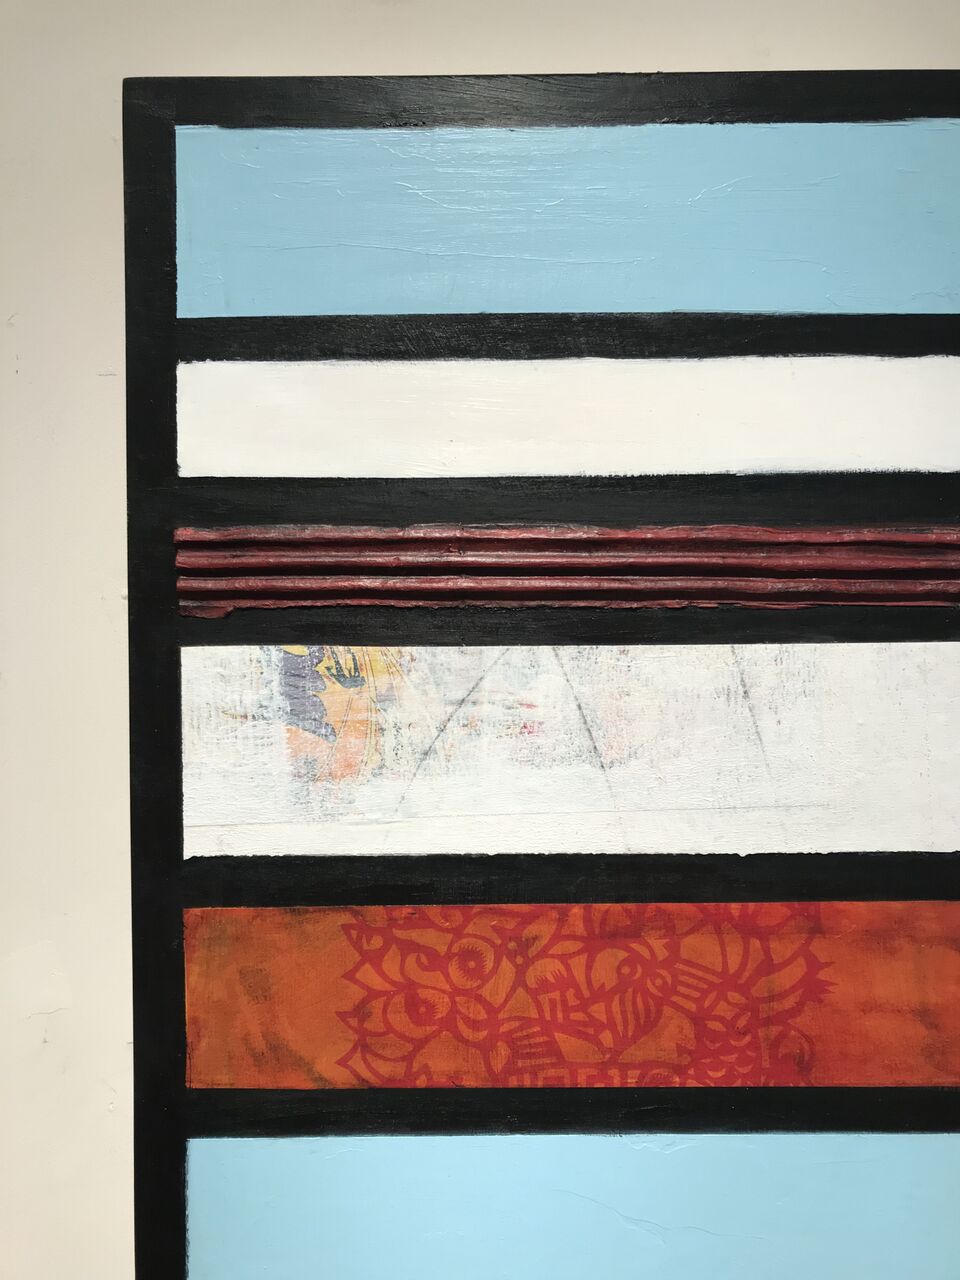 Detail of Process, 2018. Mixed Media and found papers on wood panel. 36 x 12”.